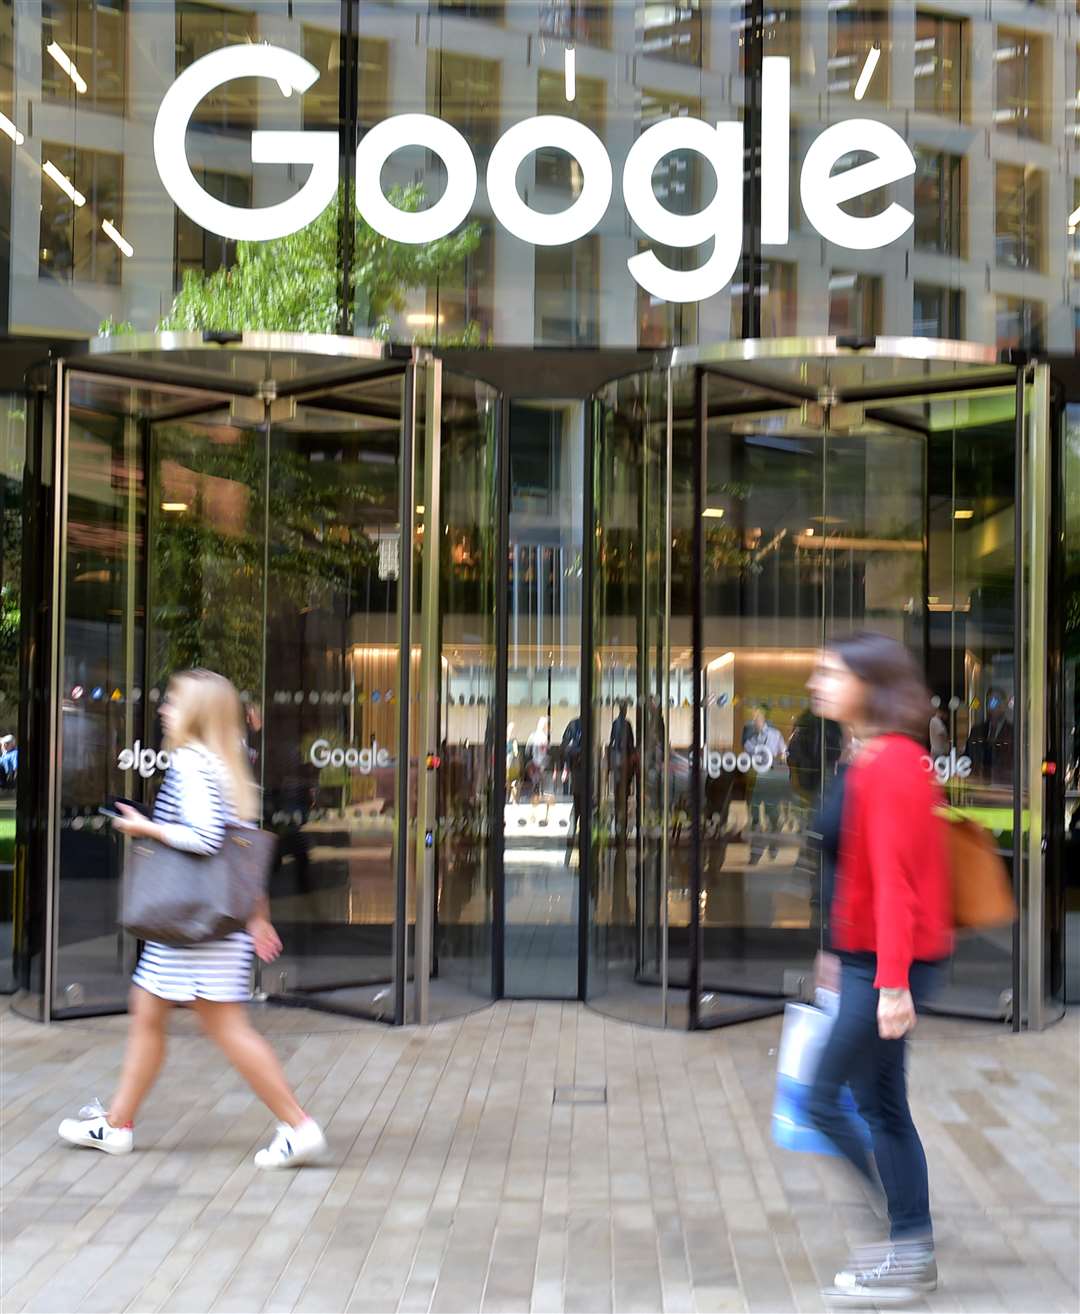 Google’s London HQ is now worth £290 million, according to accounts (Nick Ansell / PA)